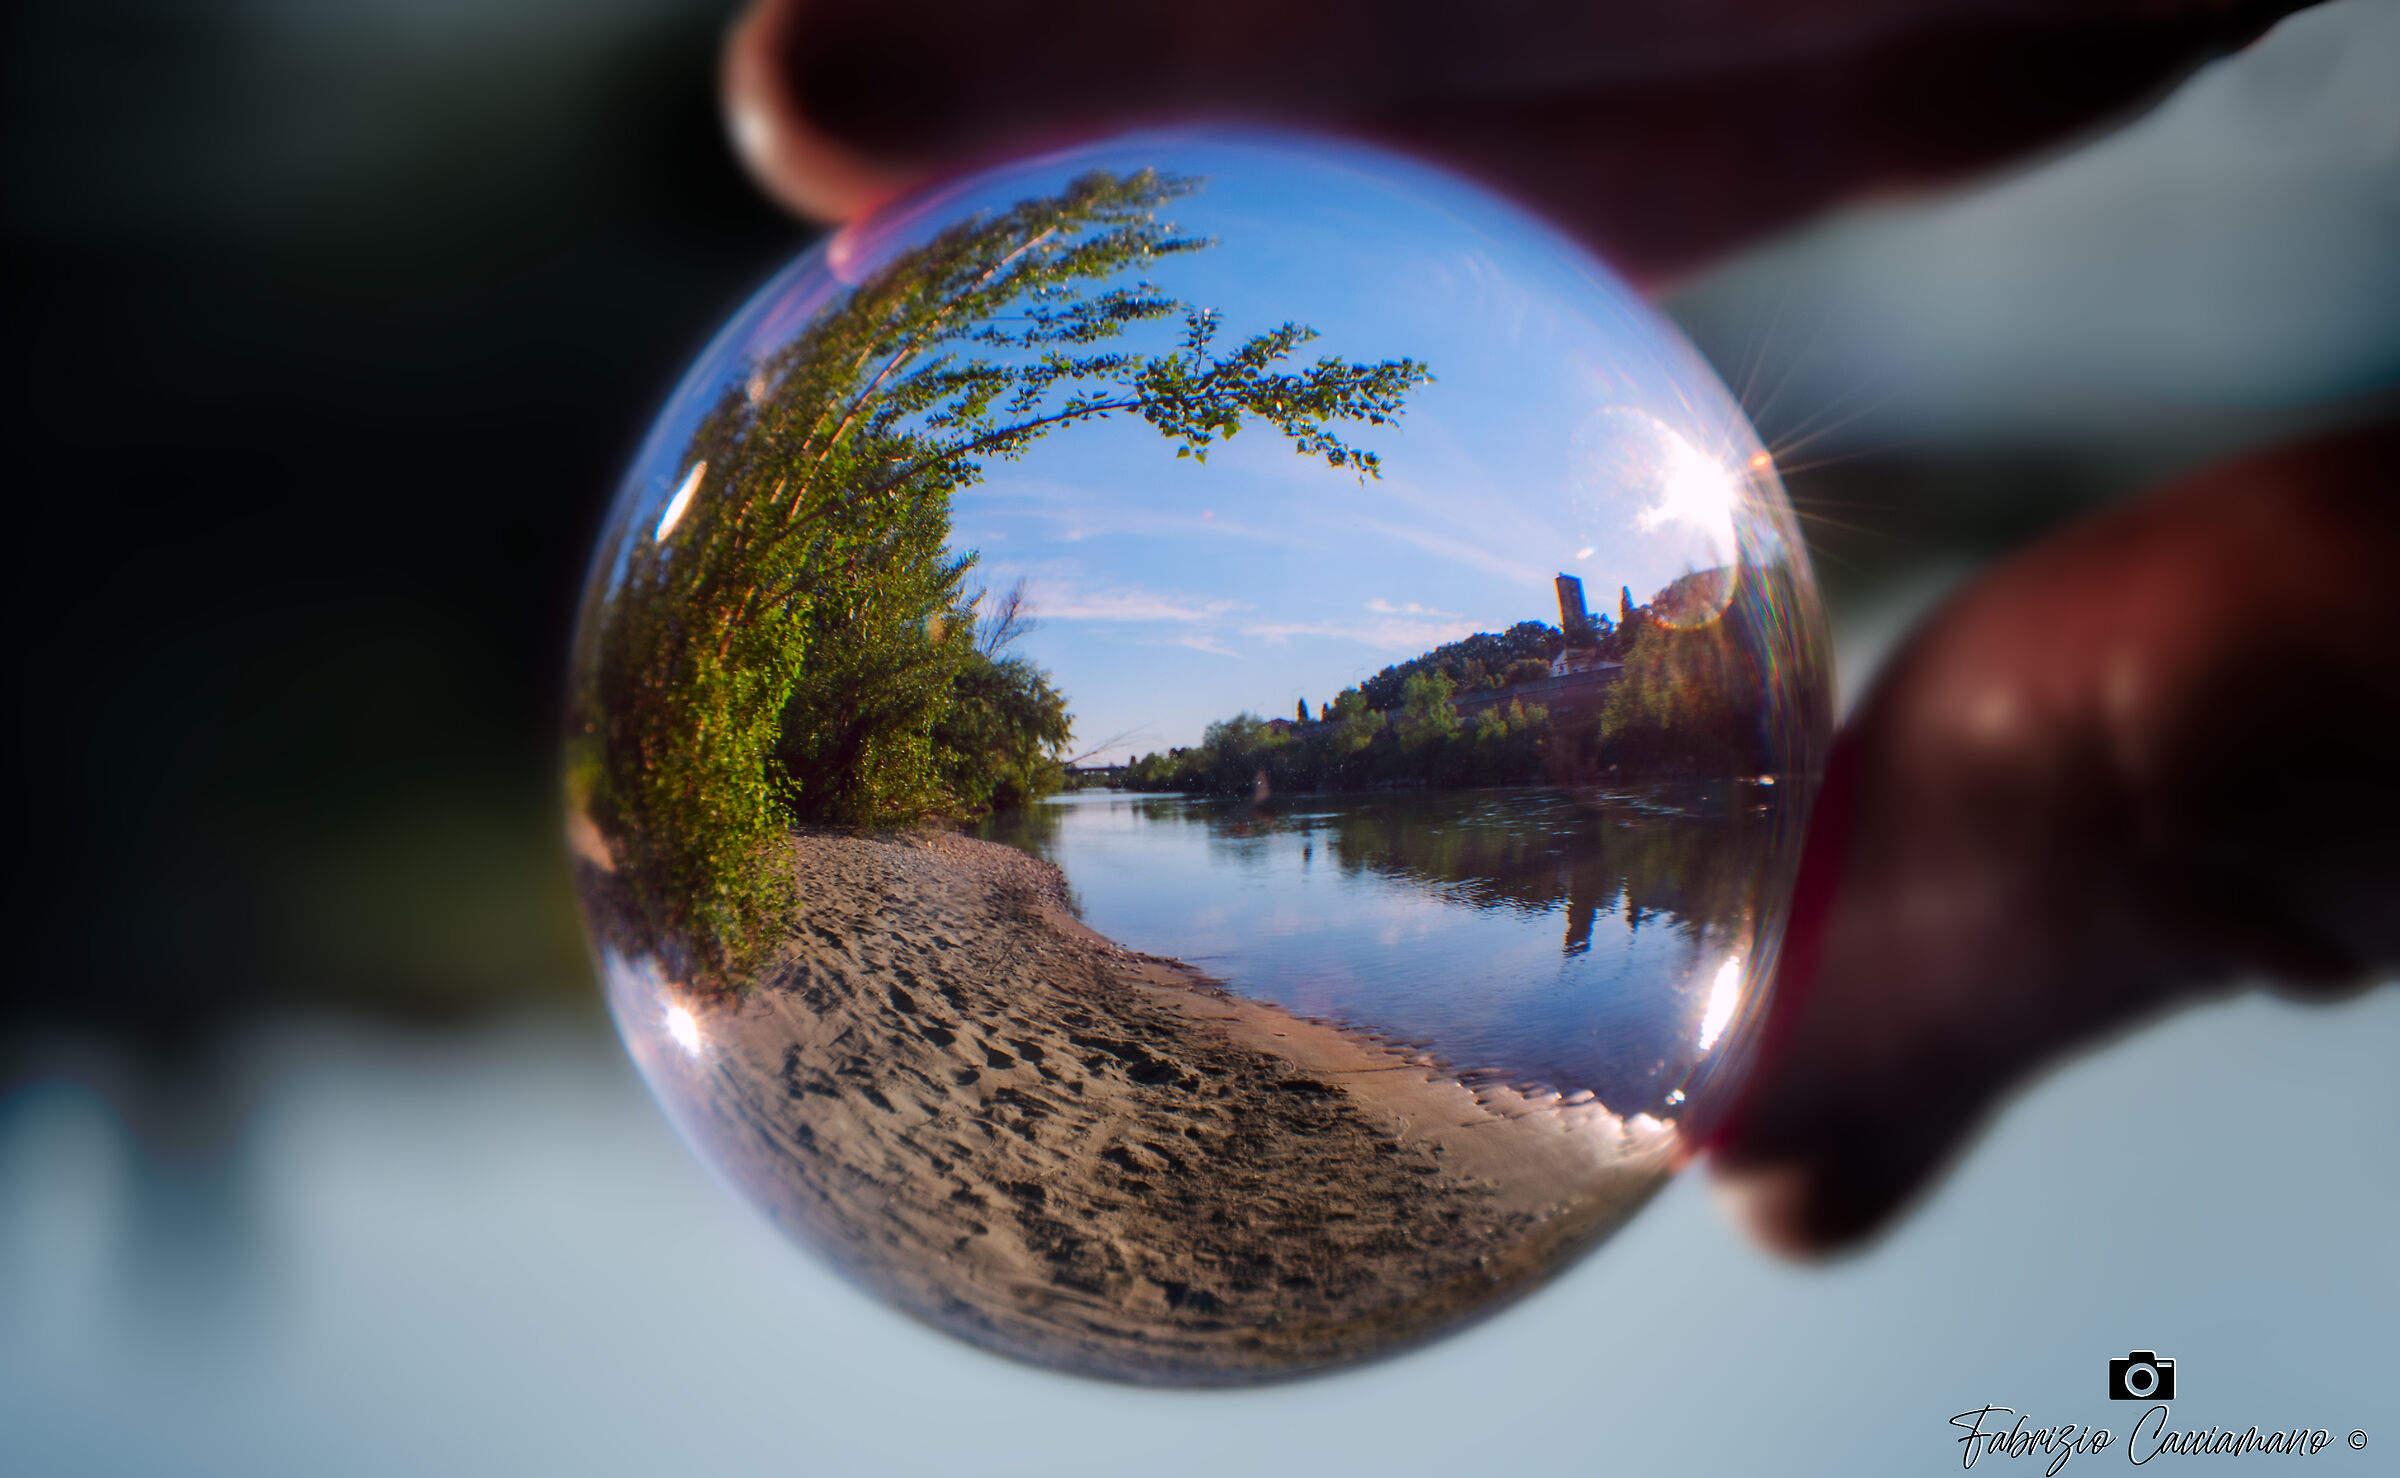 The River in a Bubble...